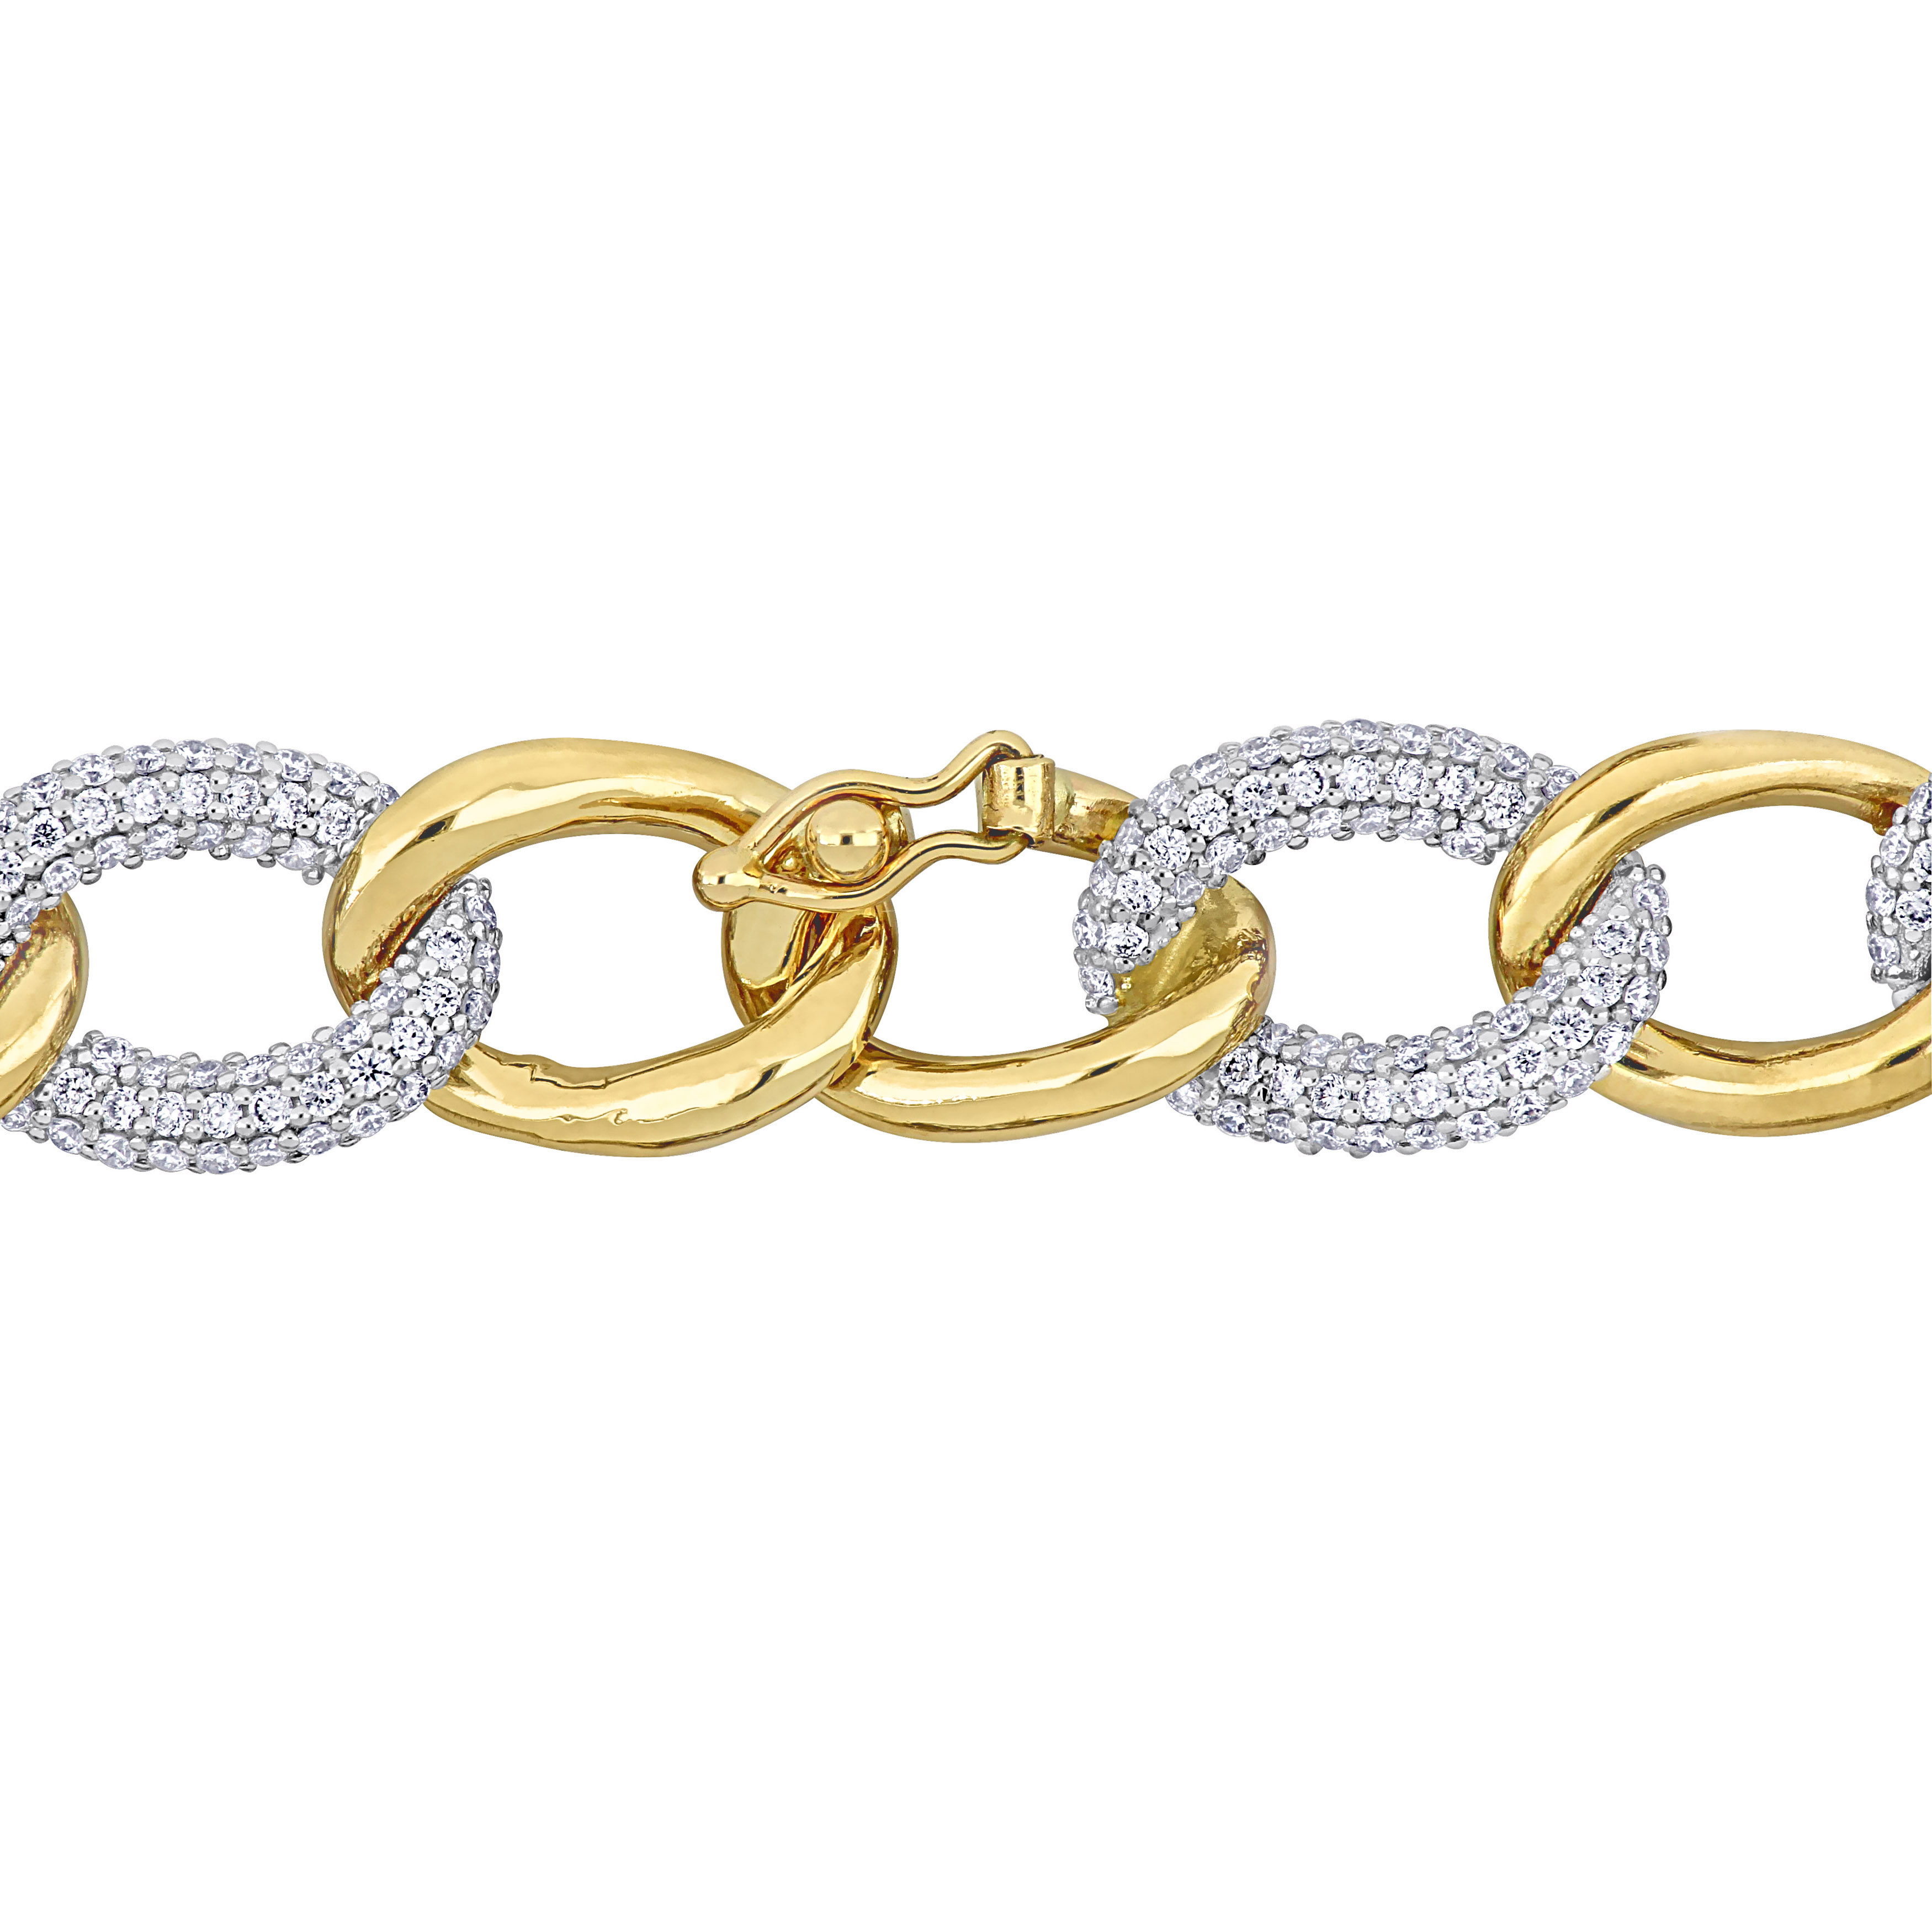 2 3/8 CT TDW Diamond Link Bracelet in Two-Tone 14K White And Yellow Gold - 7.5 In.